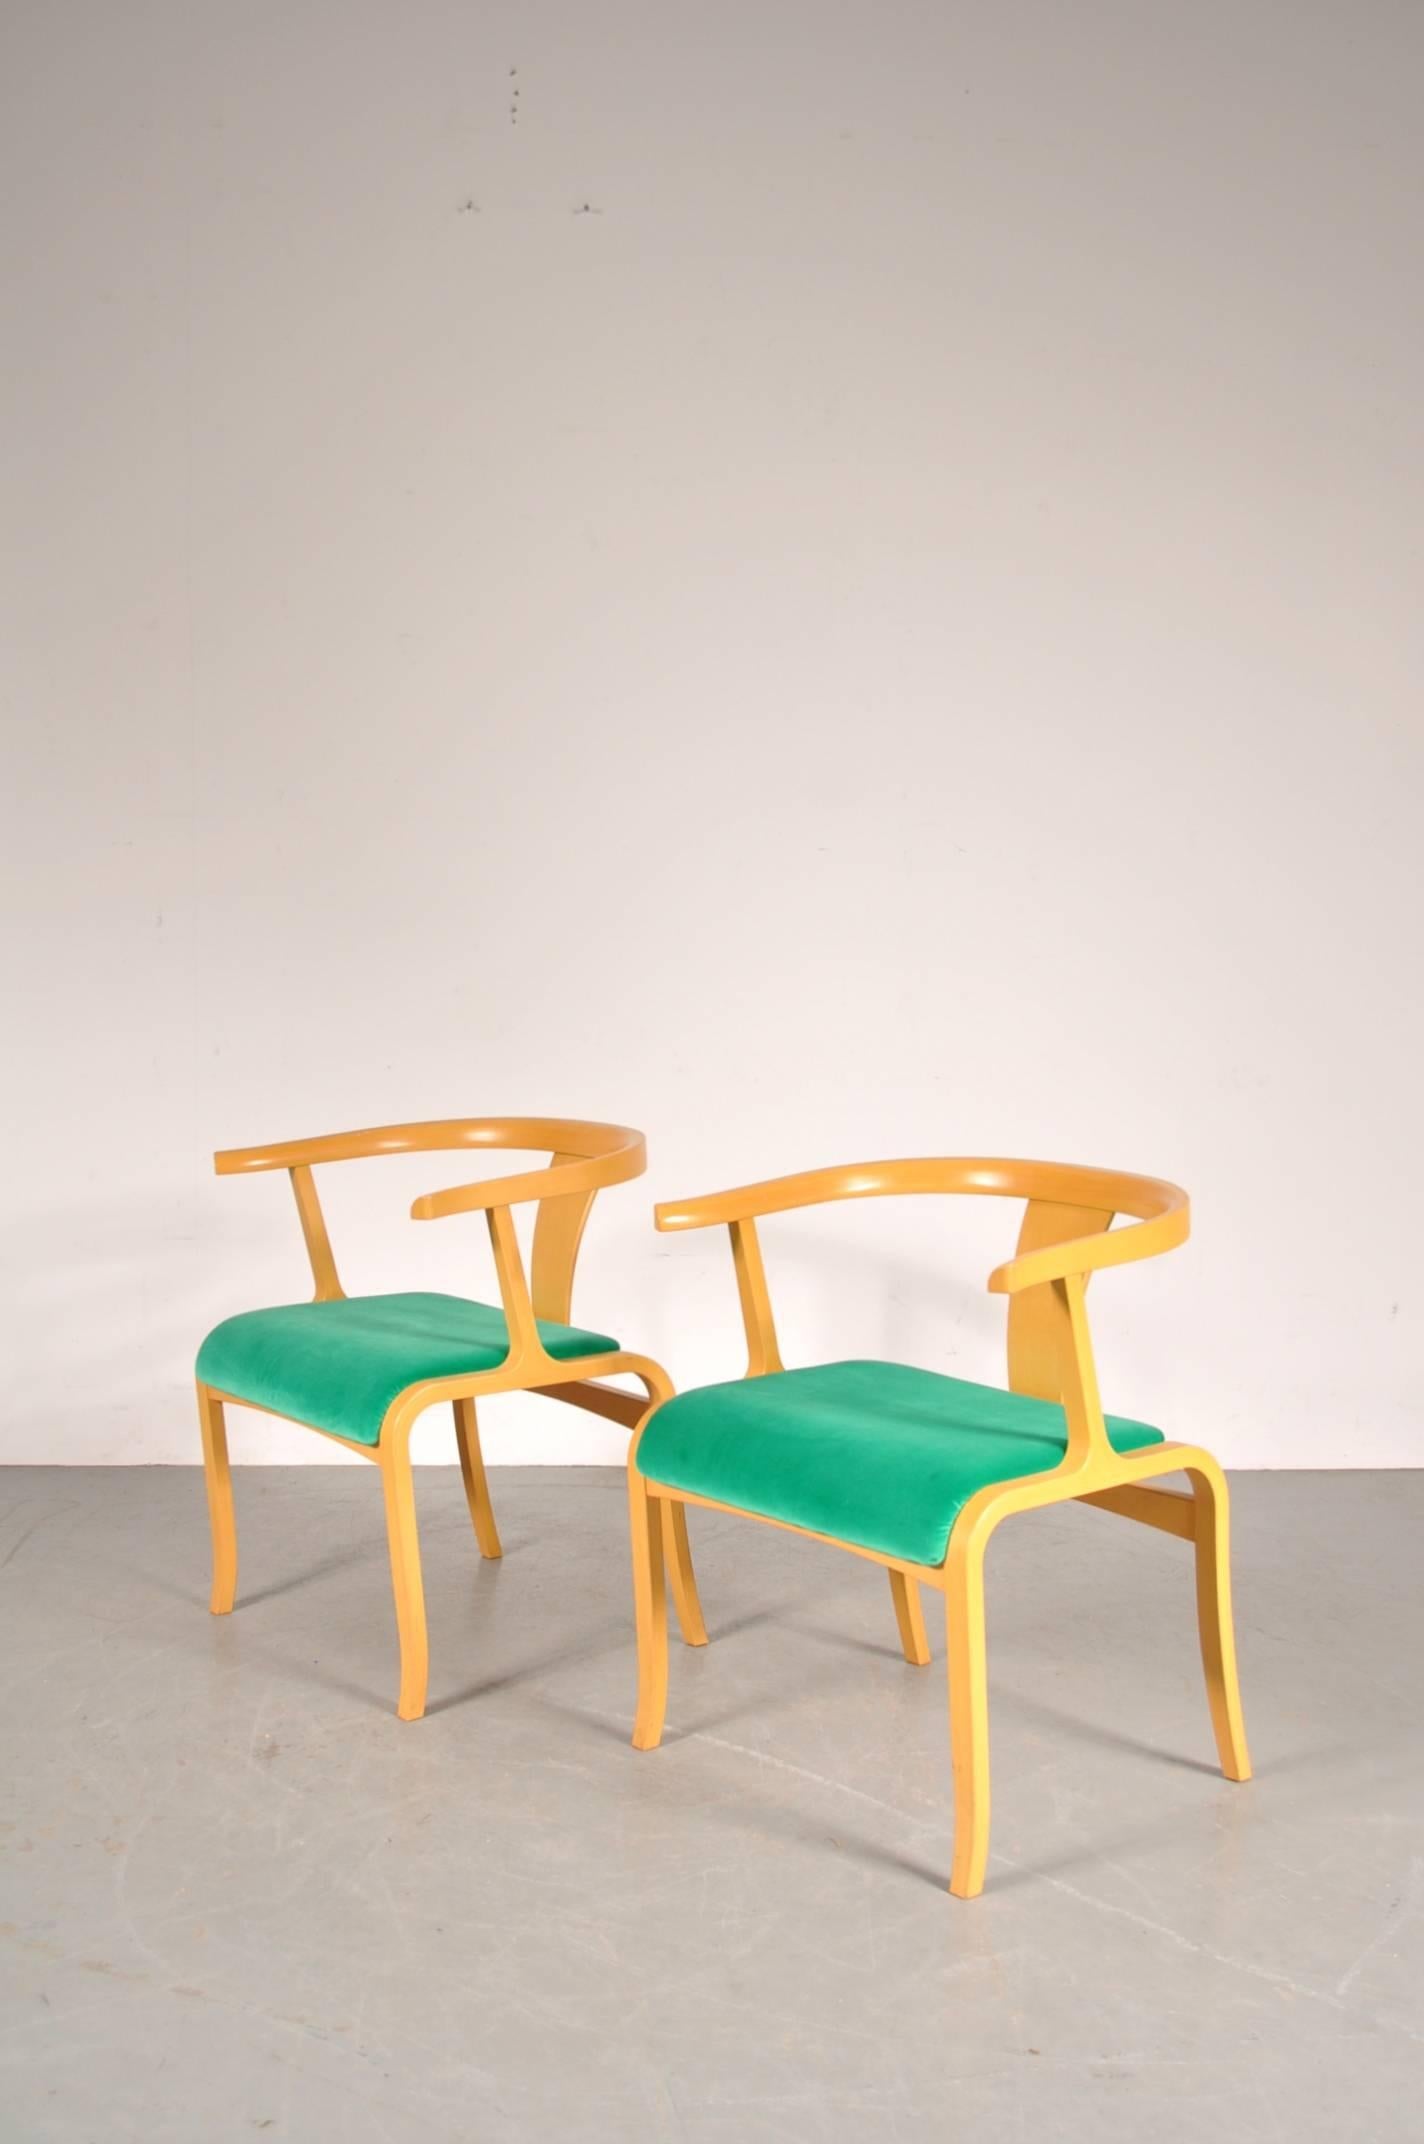 Rare desk  or side chair, attributed to Toshiyuki Kita, manufactured by Tendo Mokko in Japan, circa 1960.

These eye-catching chairs are made from beautiful quality birch plywood with a new green velvet upholstery, giving them an eye-catching